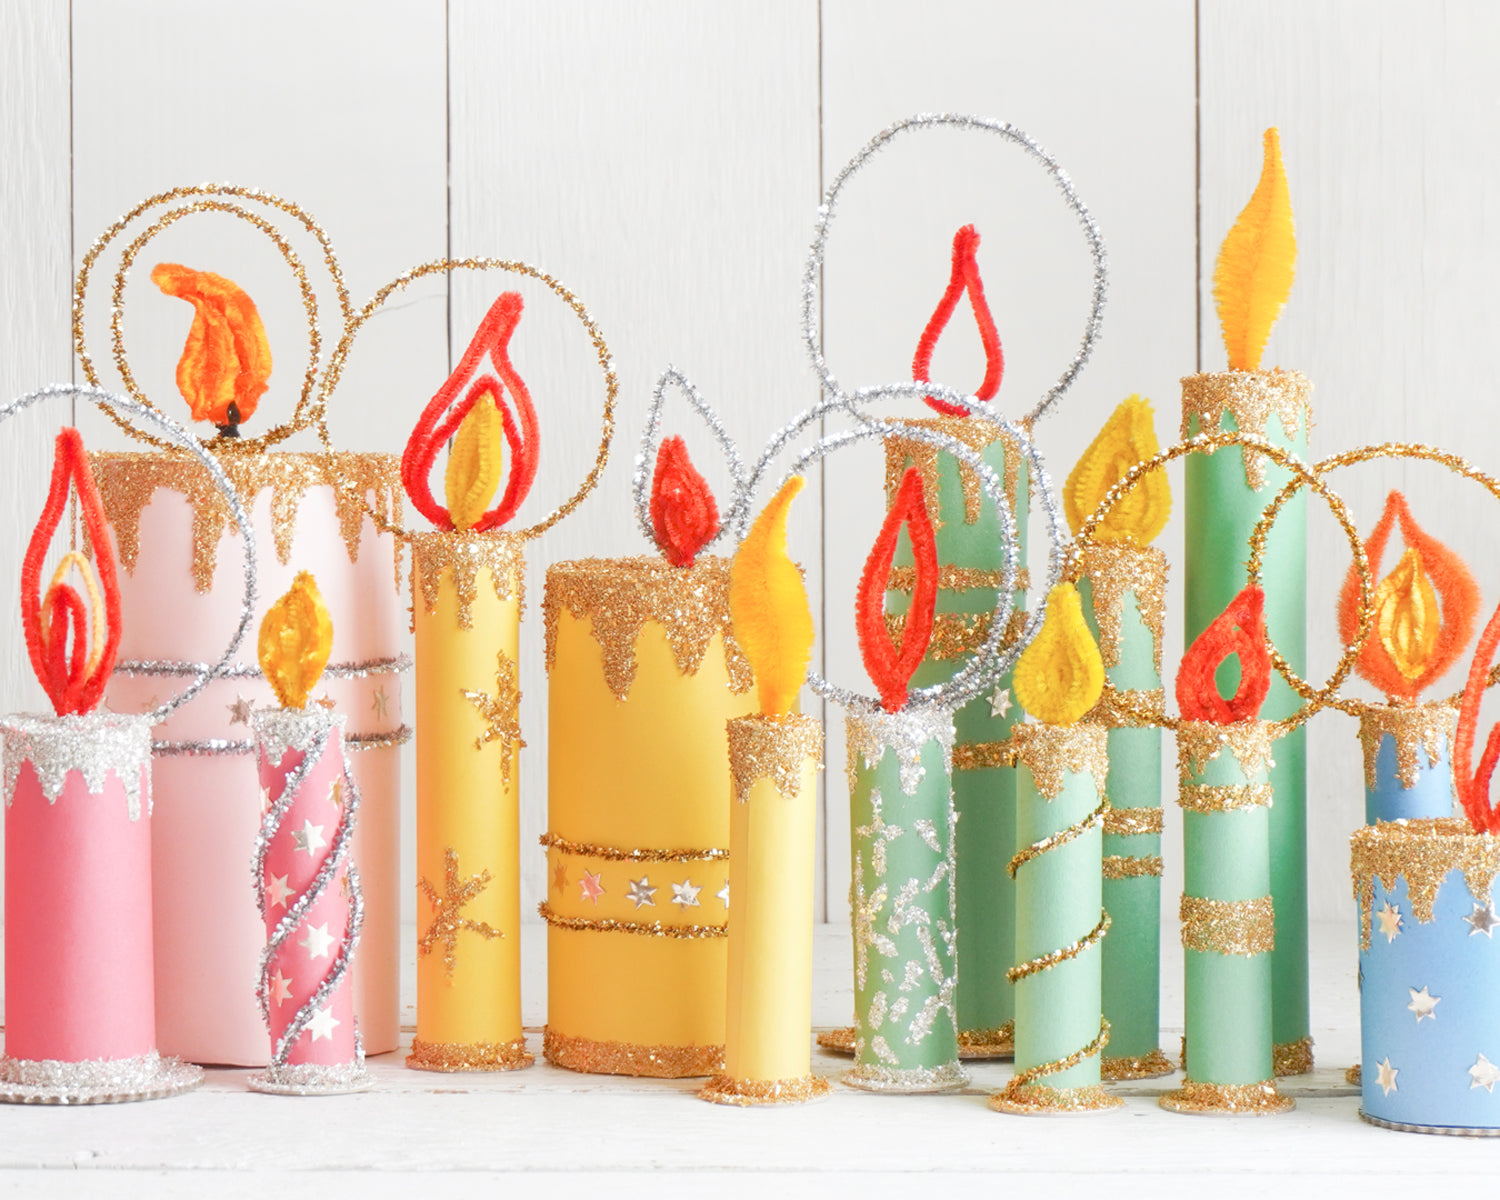 Retro Paper Christmas Candles made from Cardboard Tubes and Paper Rolls!